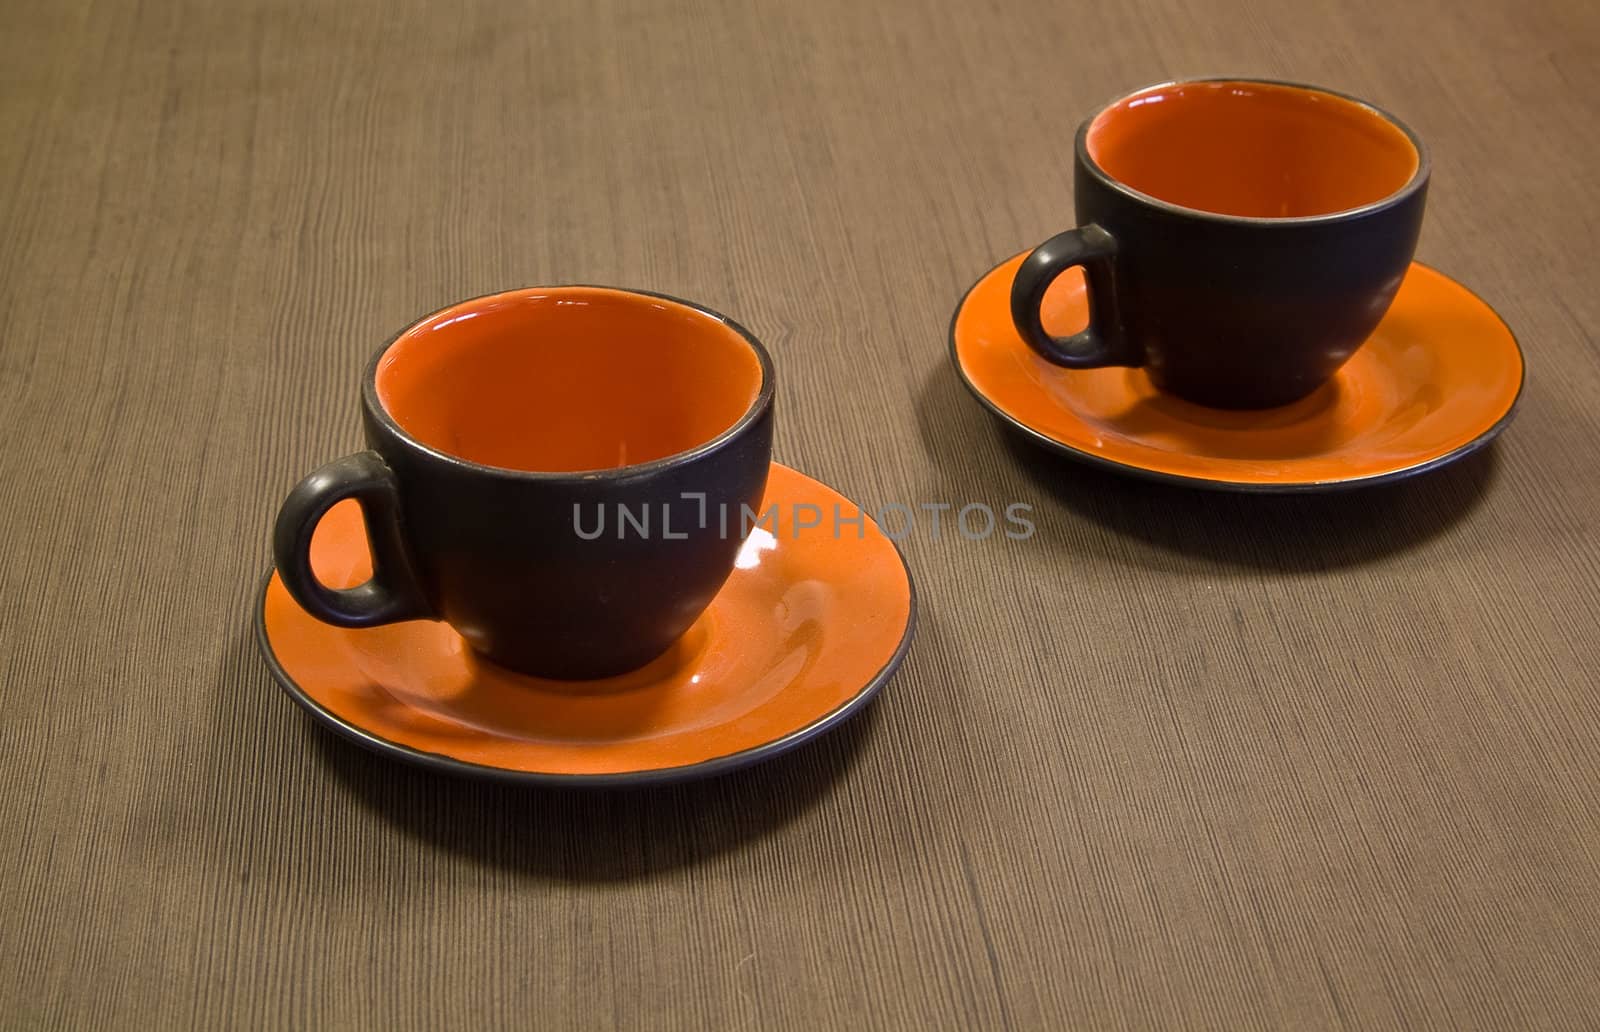 Pair cups on the table